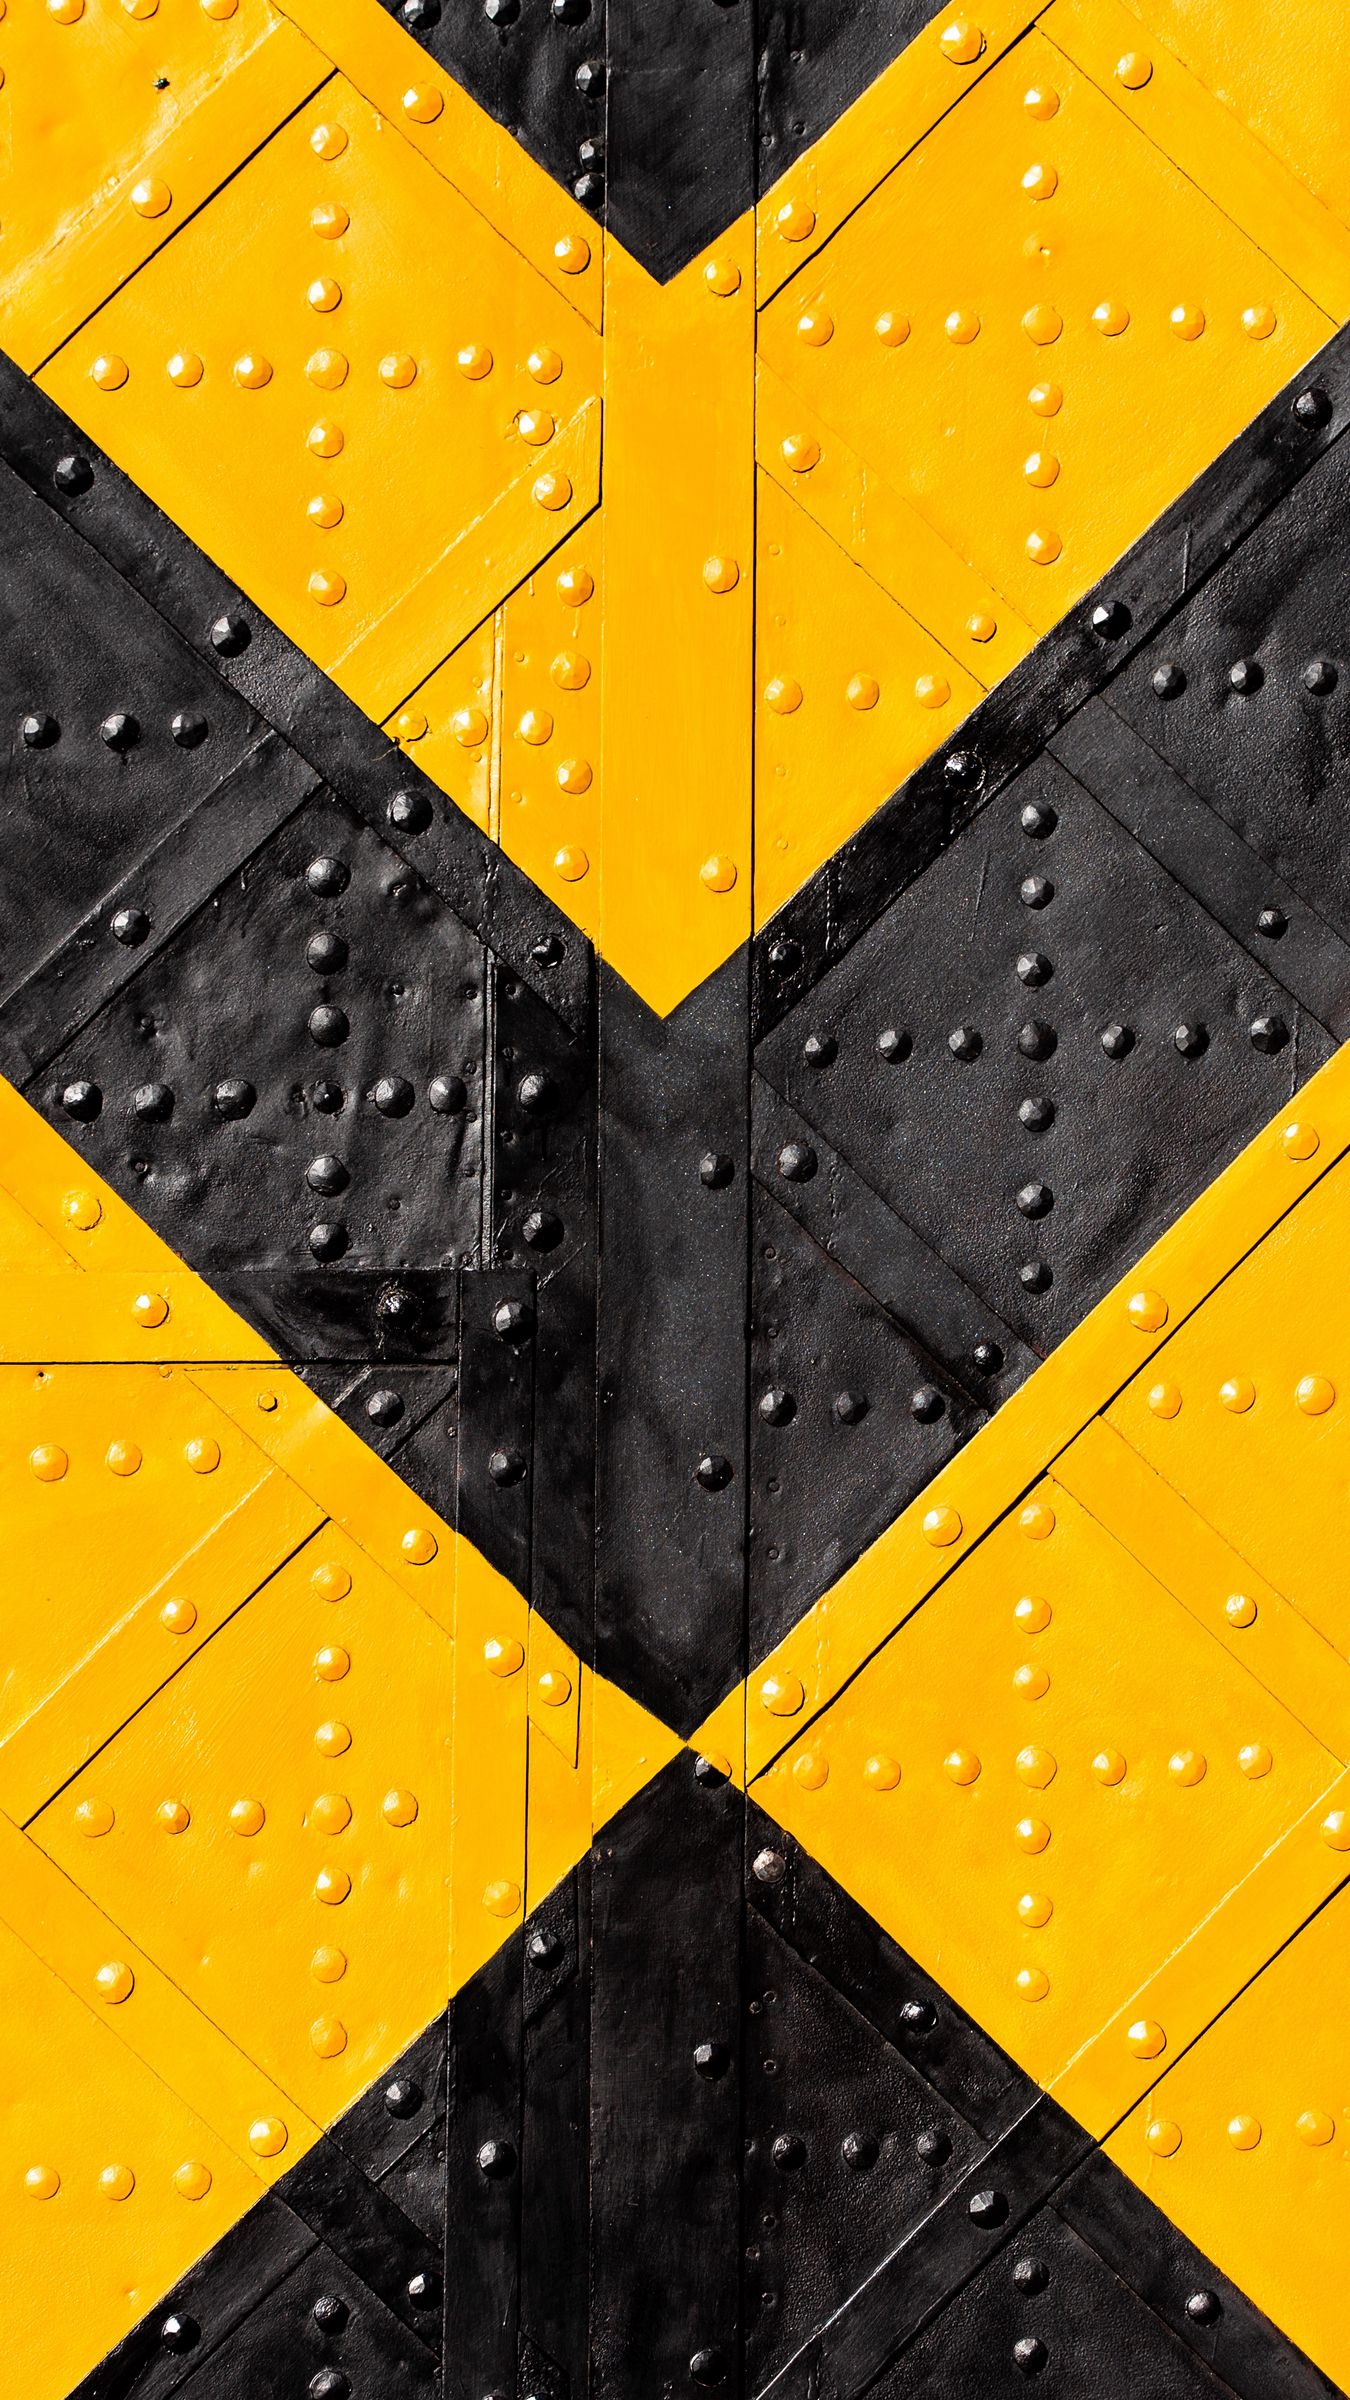 Download wallpaper 1350x2400 iron, marking, stripes, yellow, black, rivets, surface iphone 8+/7+/6s+/for parallax HD background